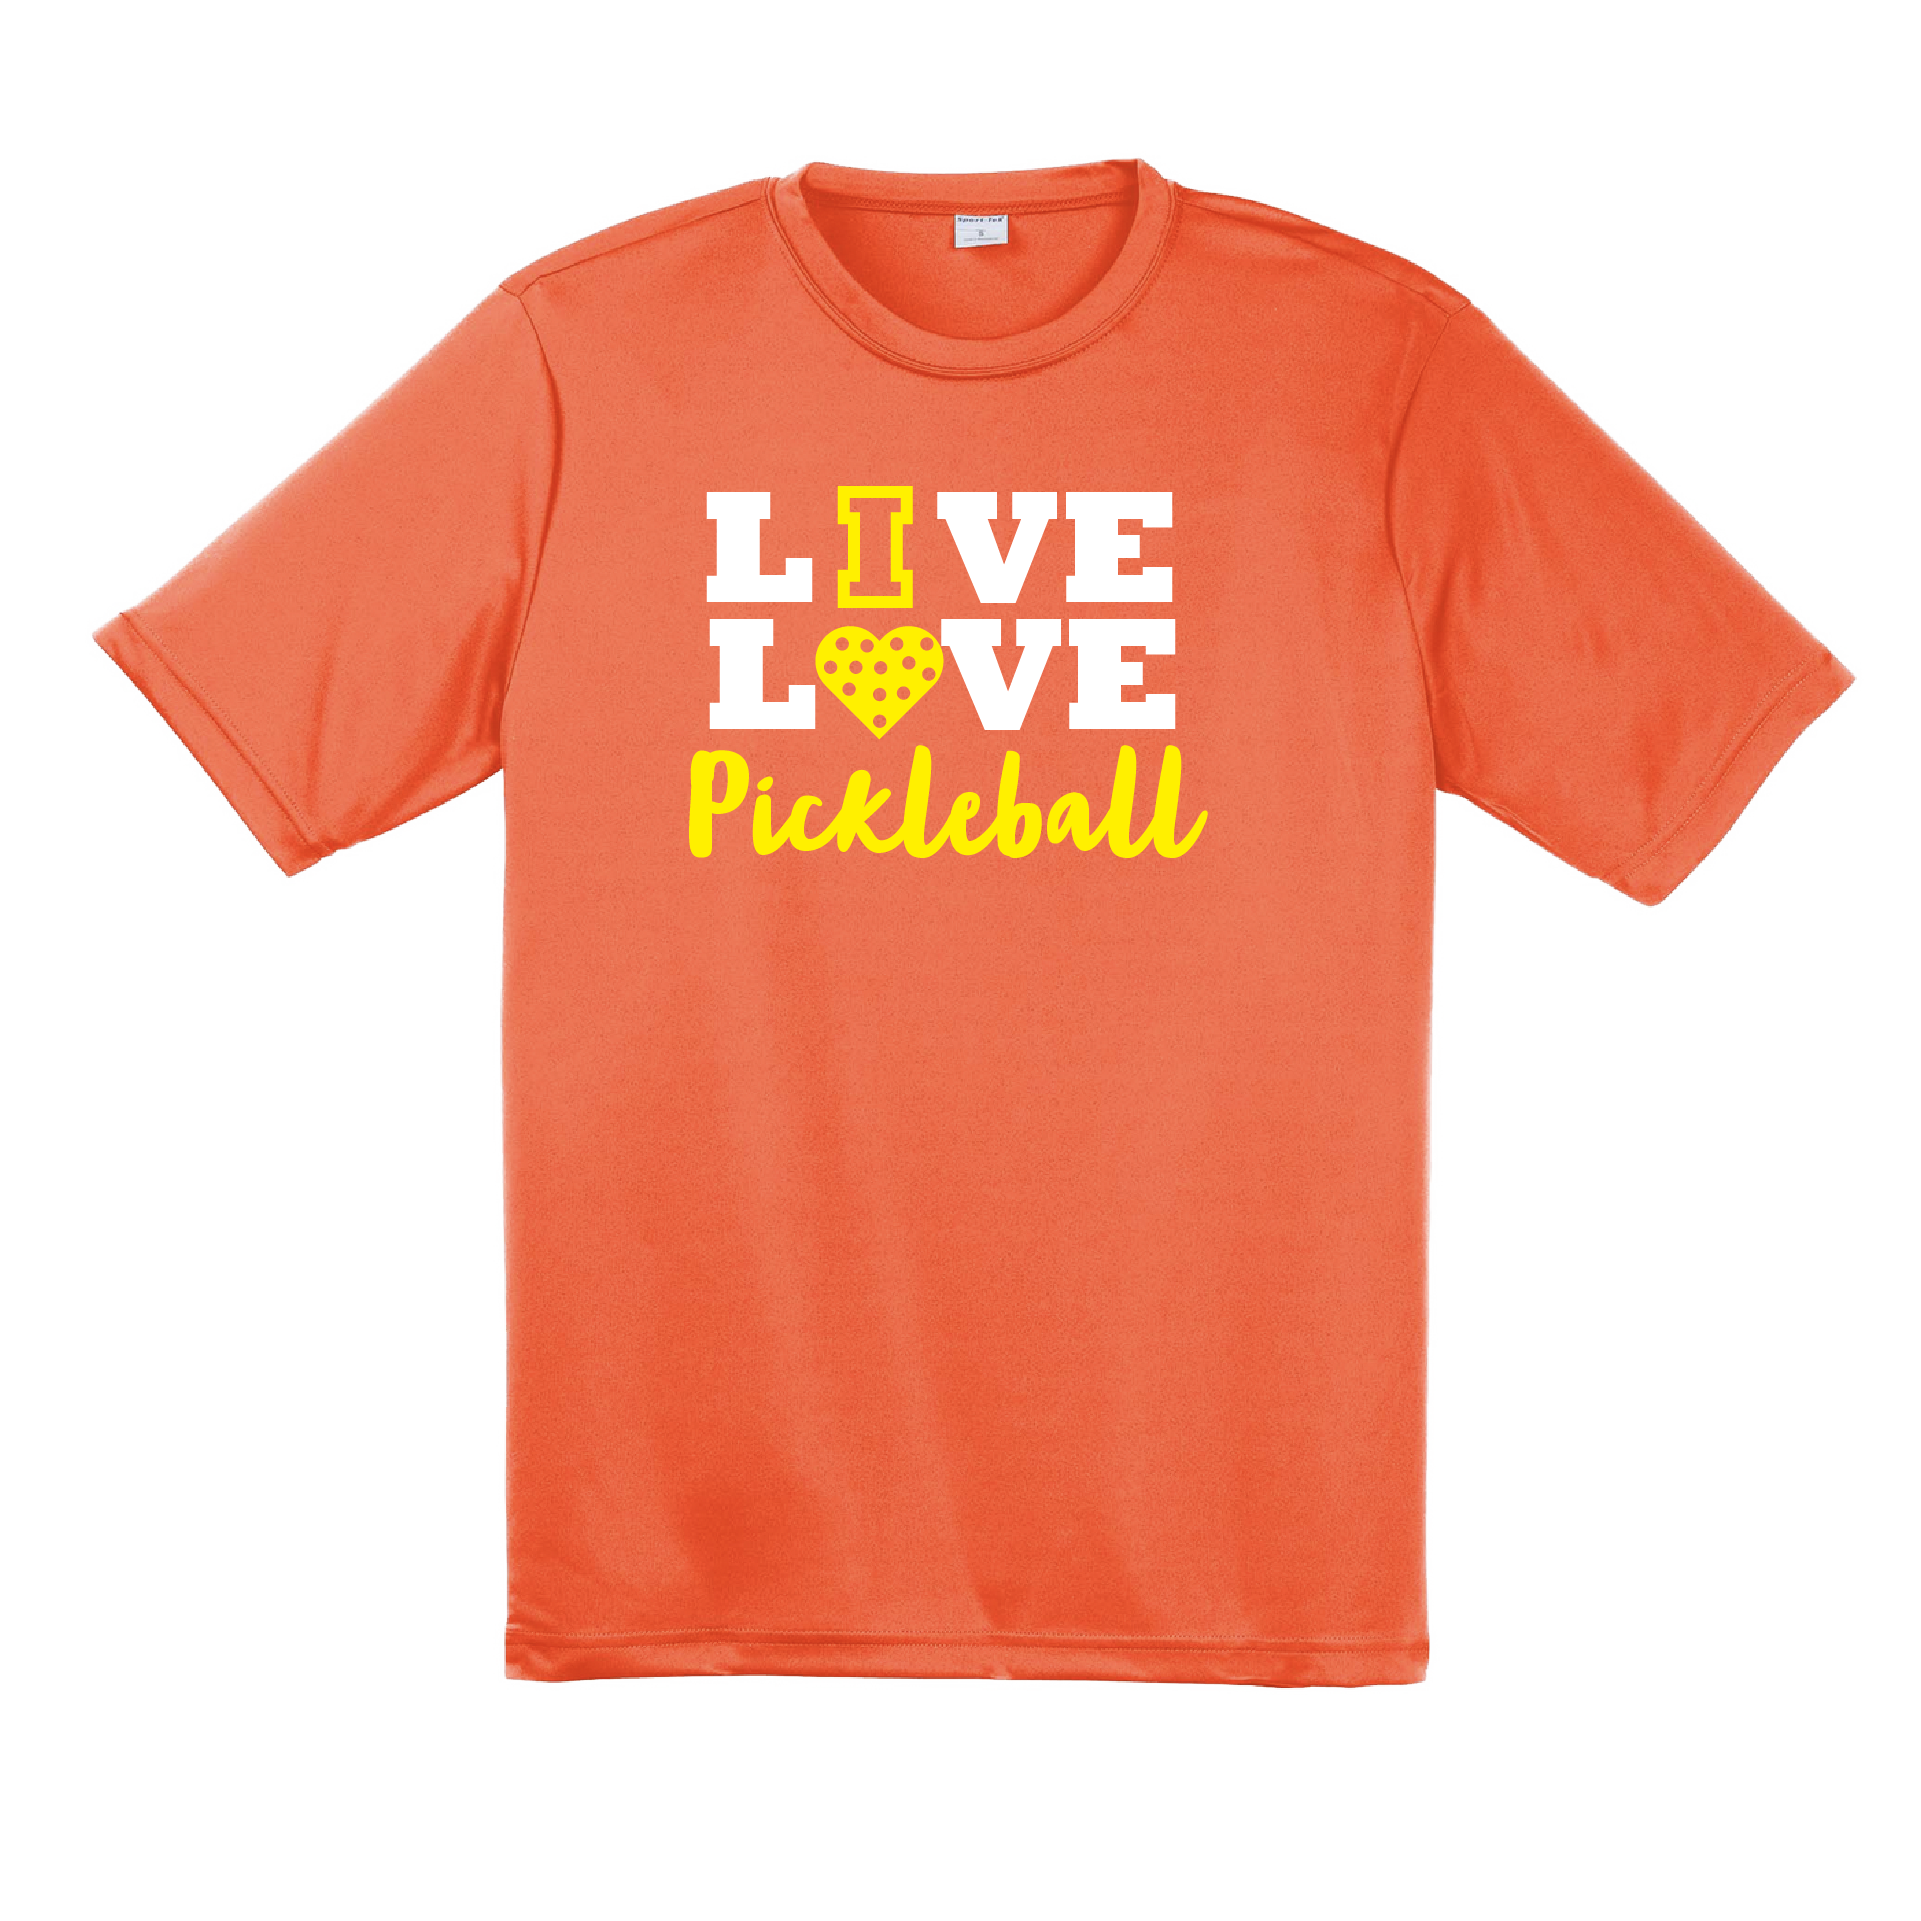 Pickleball Design: Live Love Pickleball  Men's Style: Short Sleeve  Shirts are lightweight, roomy and highly breathable. These moisture-wicking shirts are designed for athletic performance. They feature PosiCharge technology to lock in color and prevent logos from fading. Removable tag and set-in sleeves for comfort.